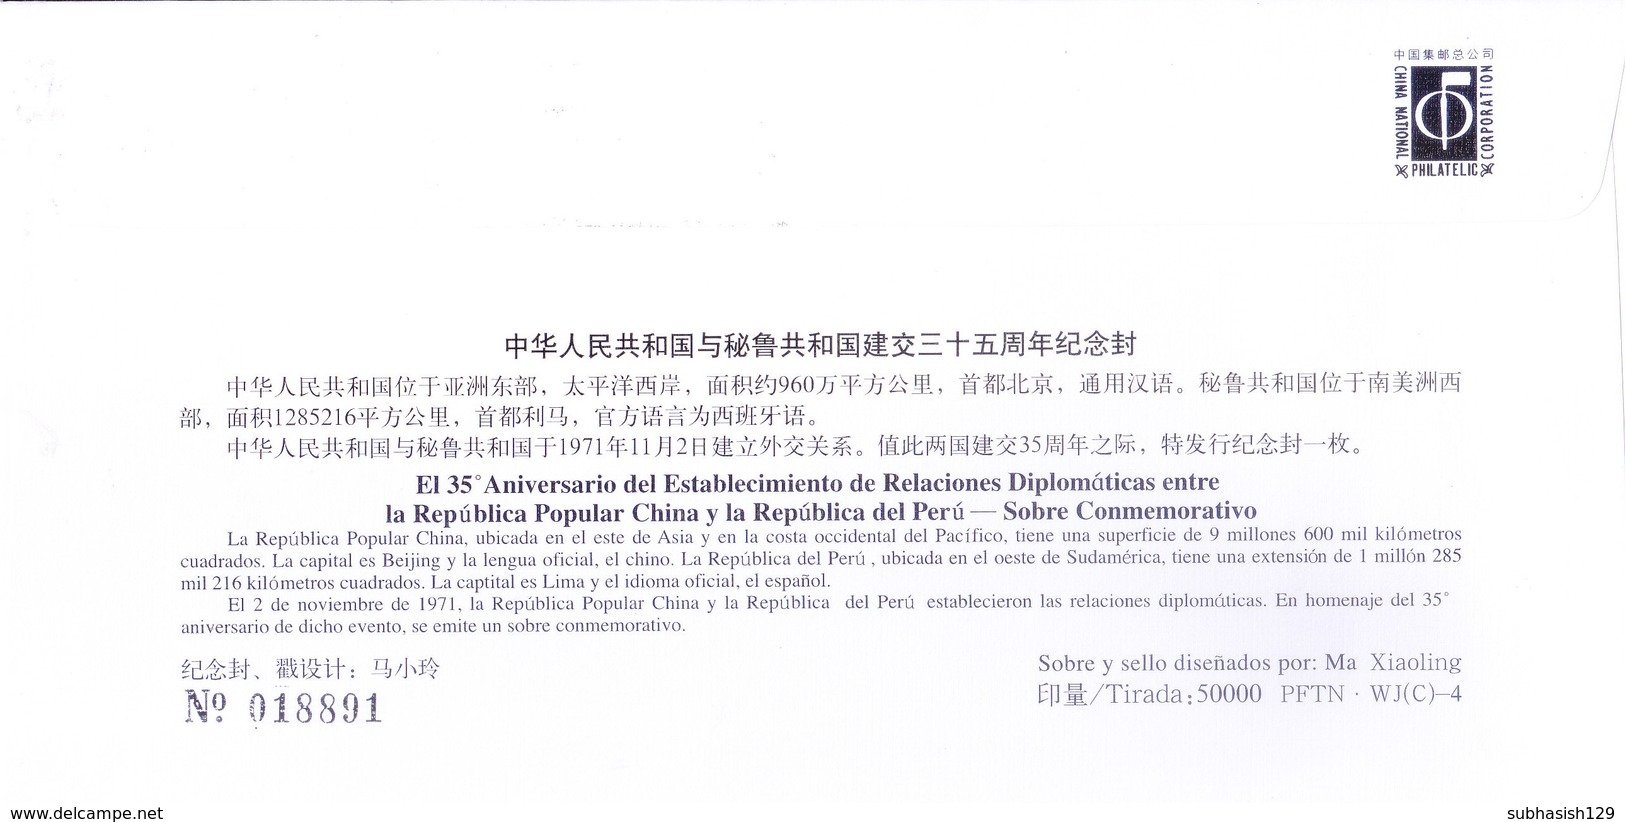 CHINA : FIRST DAY COVER : 15TH ANNIVERSARY OF PERU DIPLOMATIC RELATIONSHIP - 02-11-2006 - Covers & Documents